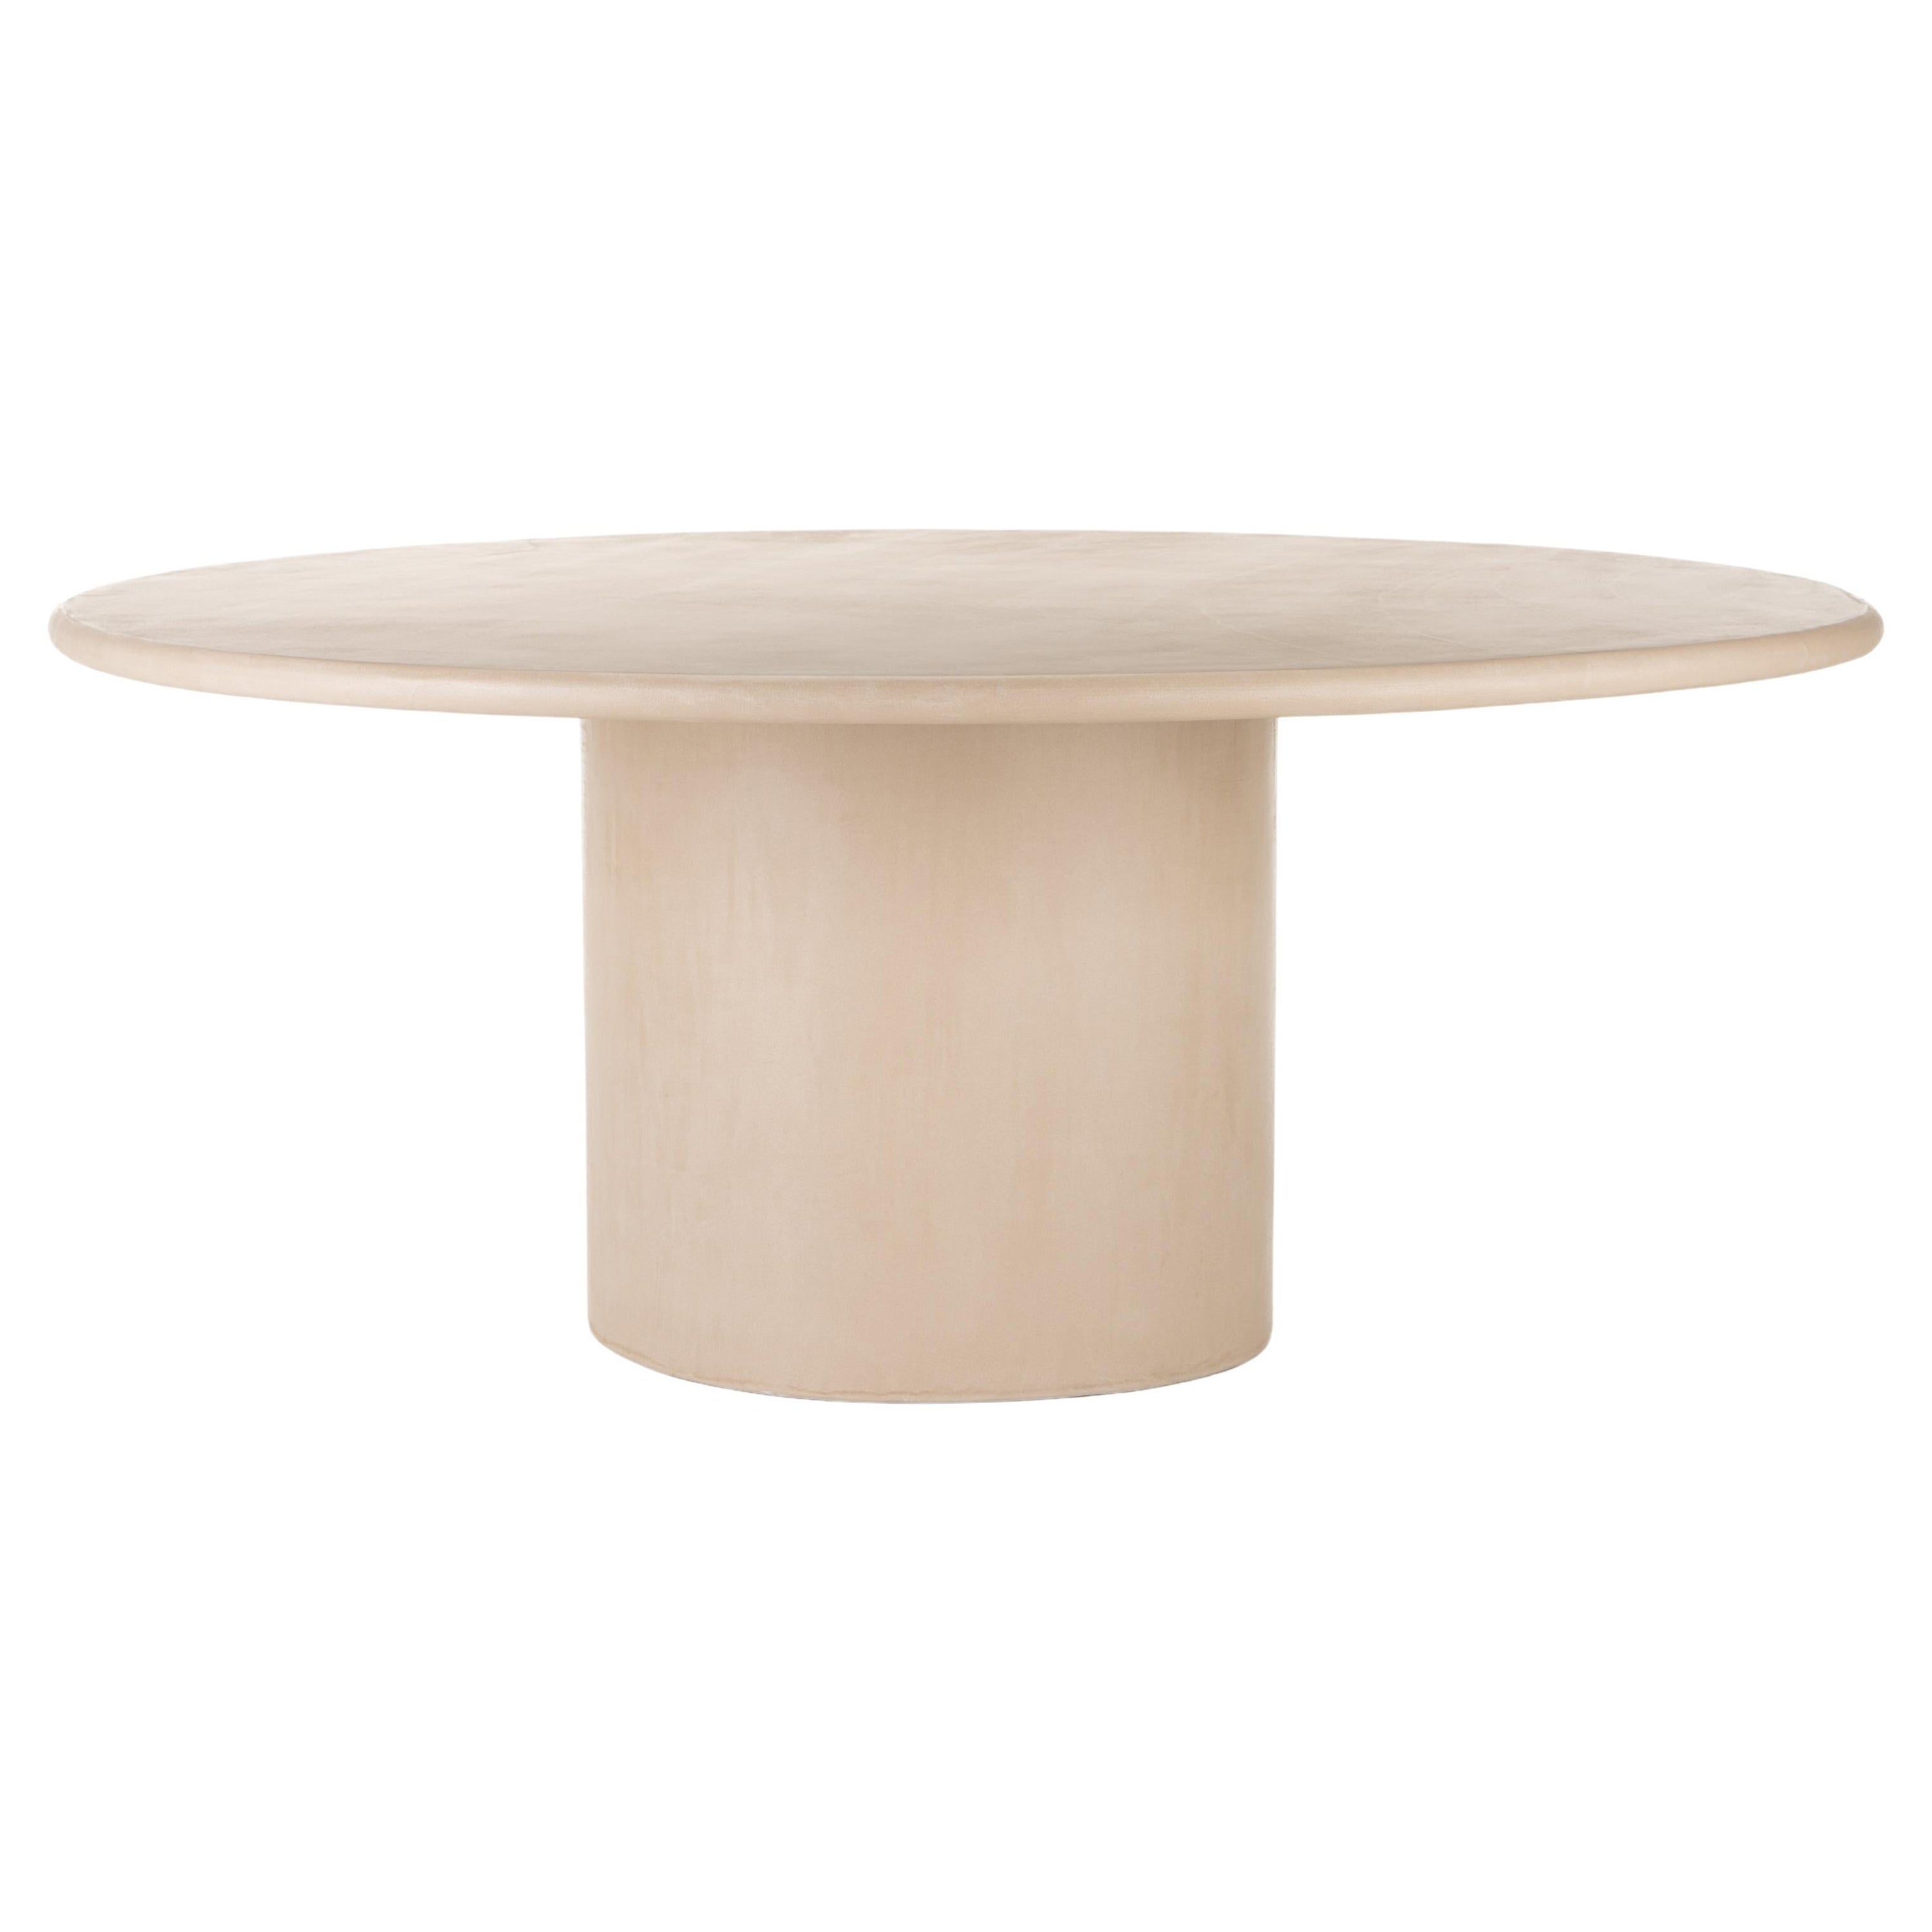 Natural Plaster Dining Table "Sami" 130 by Isabelle Beaumont